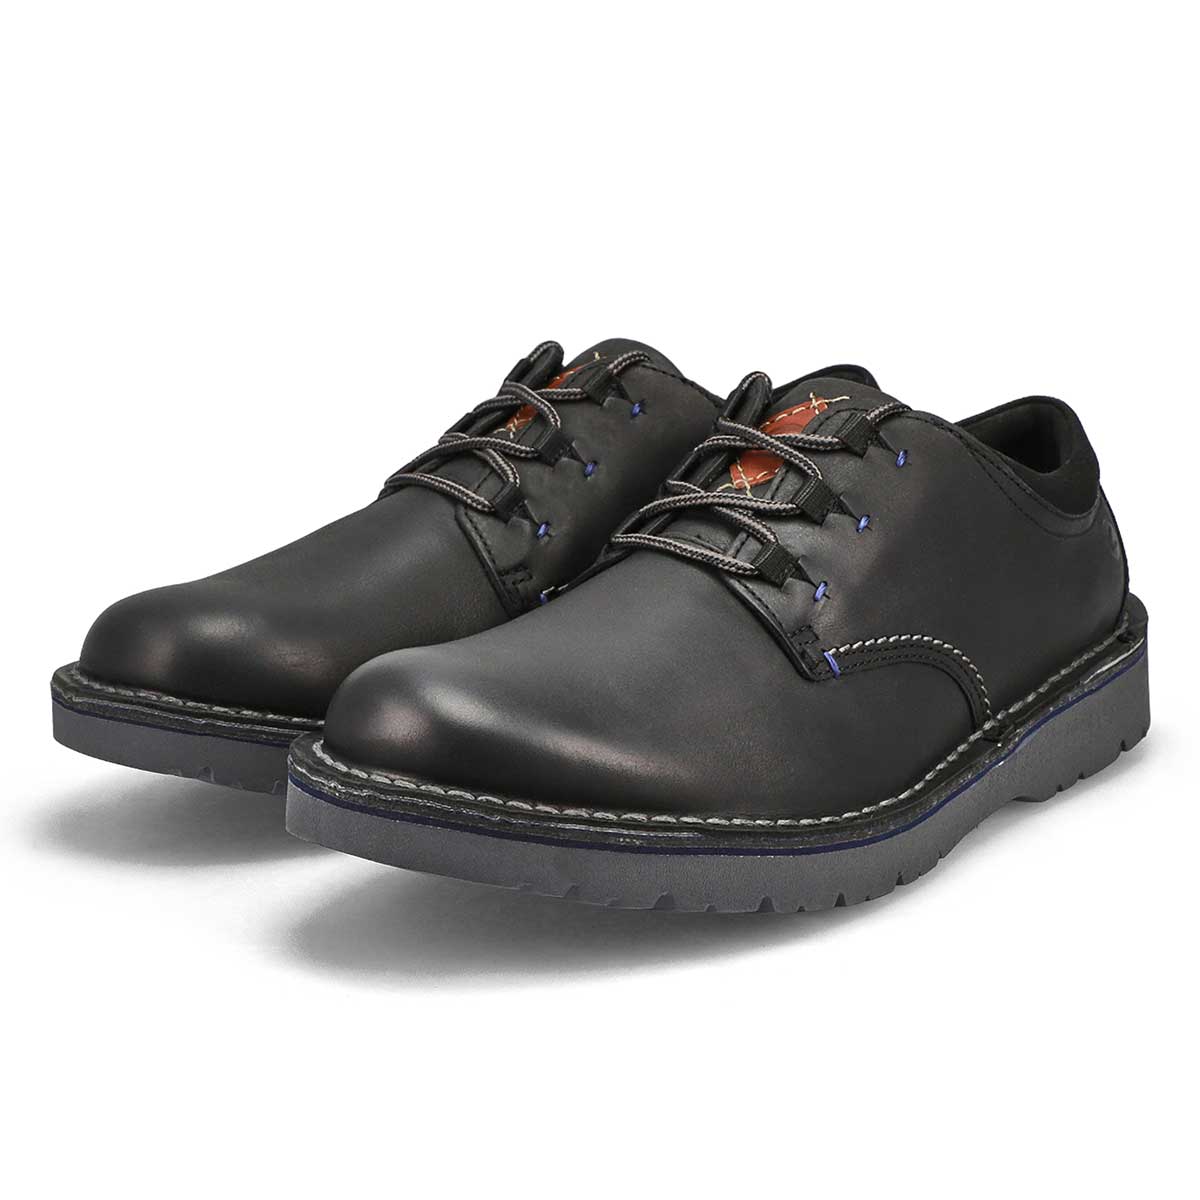 Chaussure EASTFORD LOW, noir, hommes